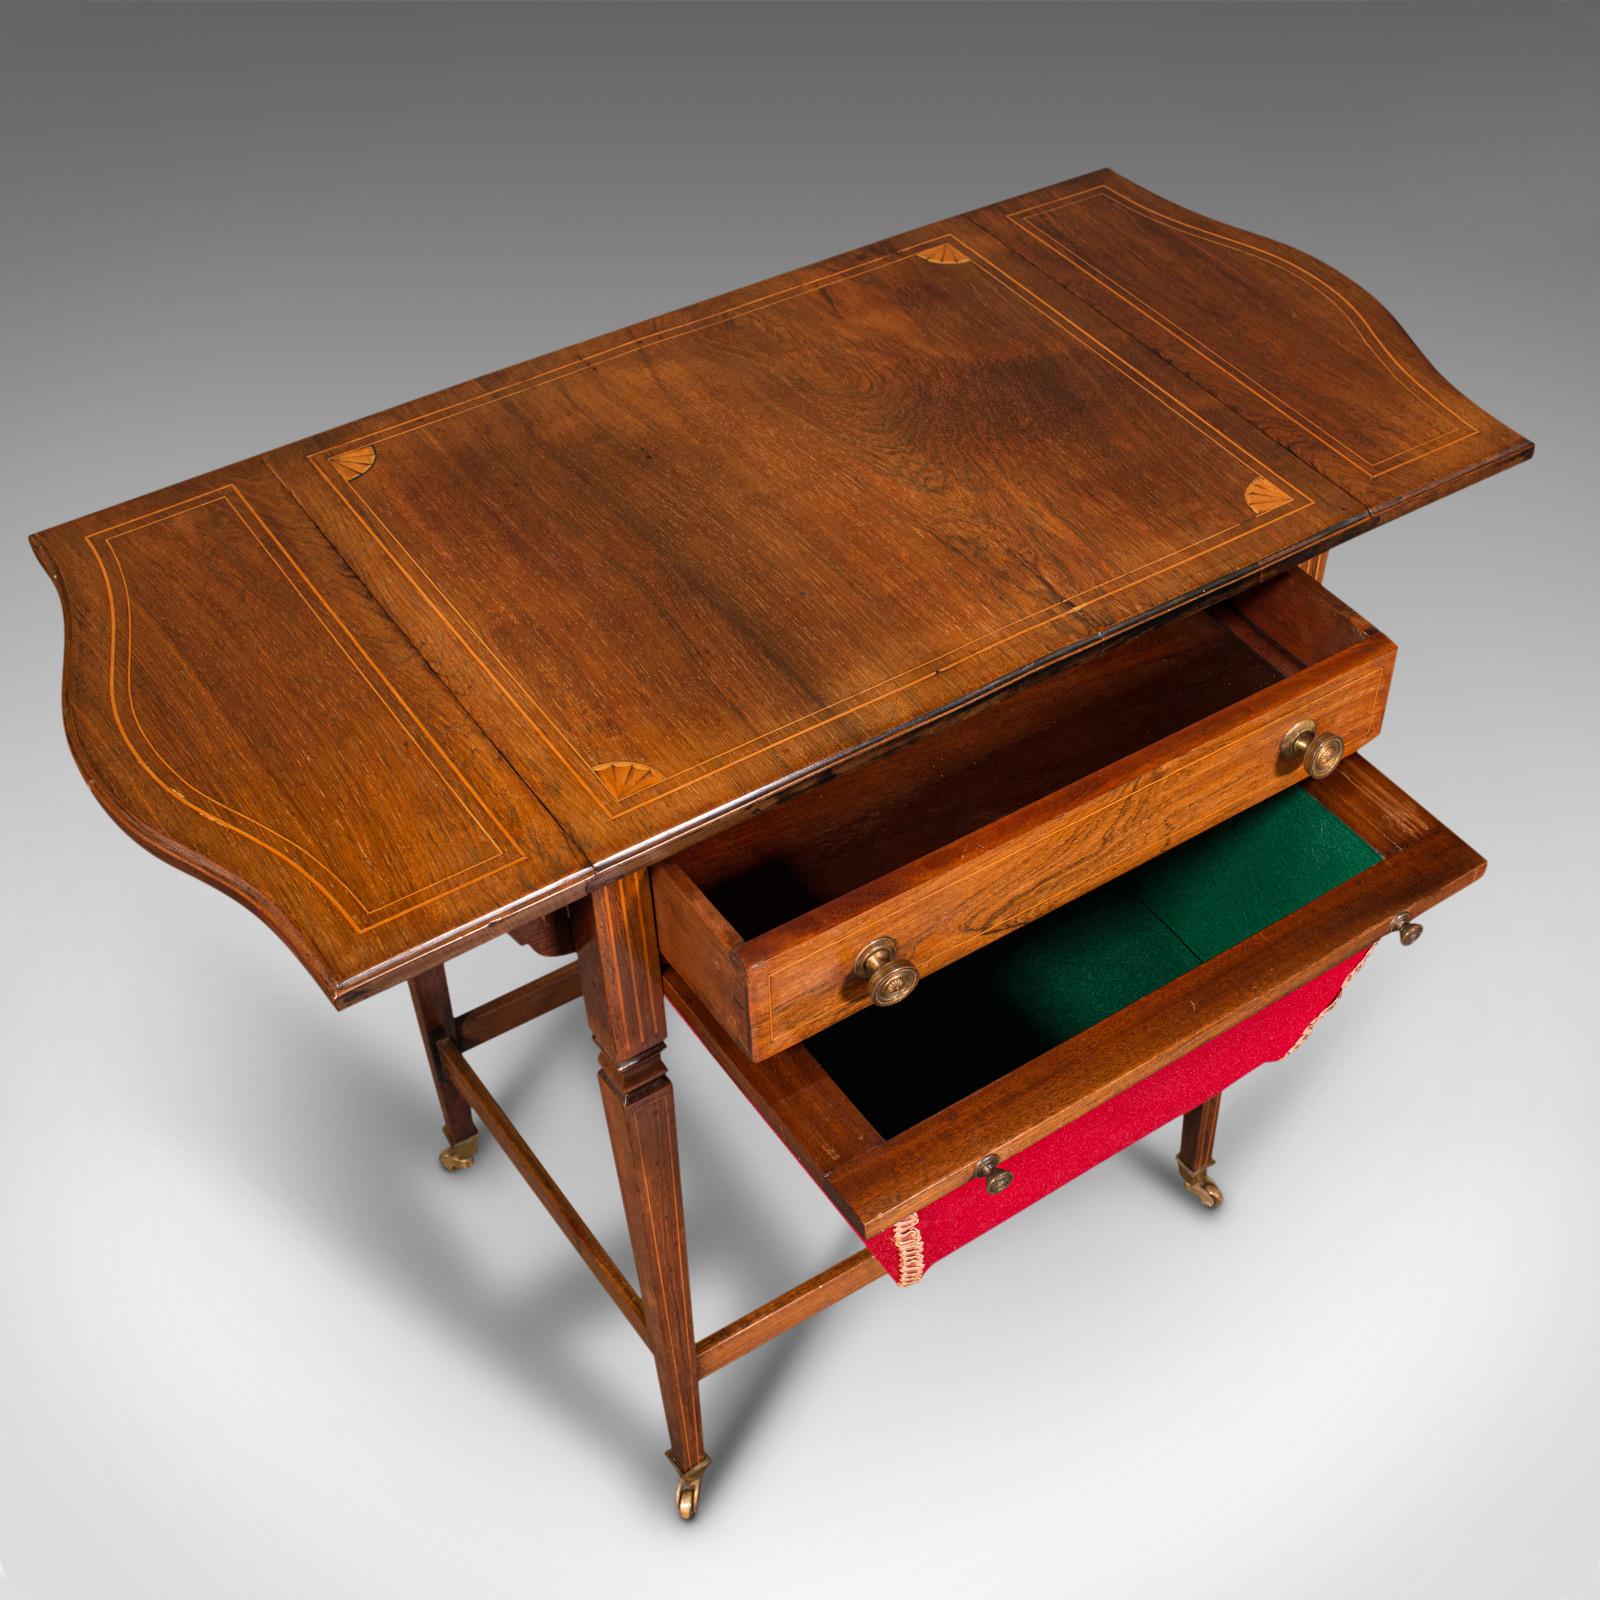 19th Century Antique Drop Leaf Sewing Table, English, Rosewood, Side, Lamp, Regency, C.1820 For Sale